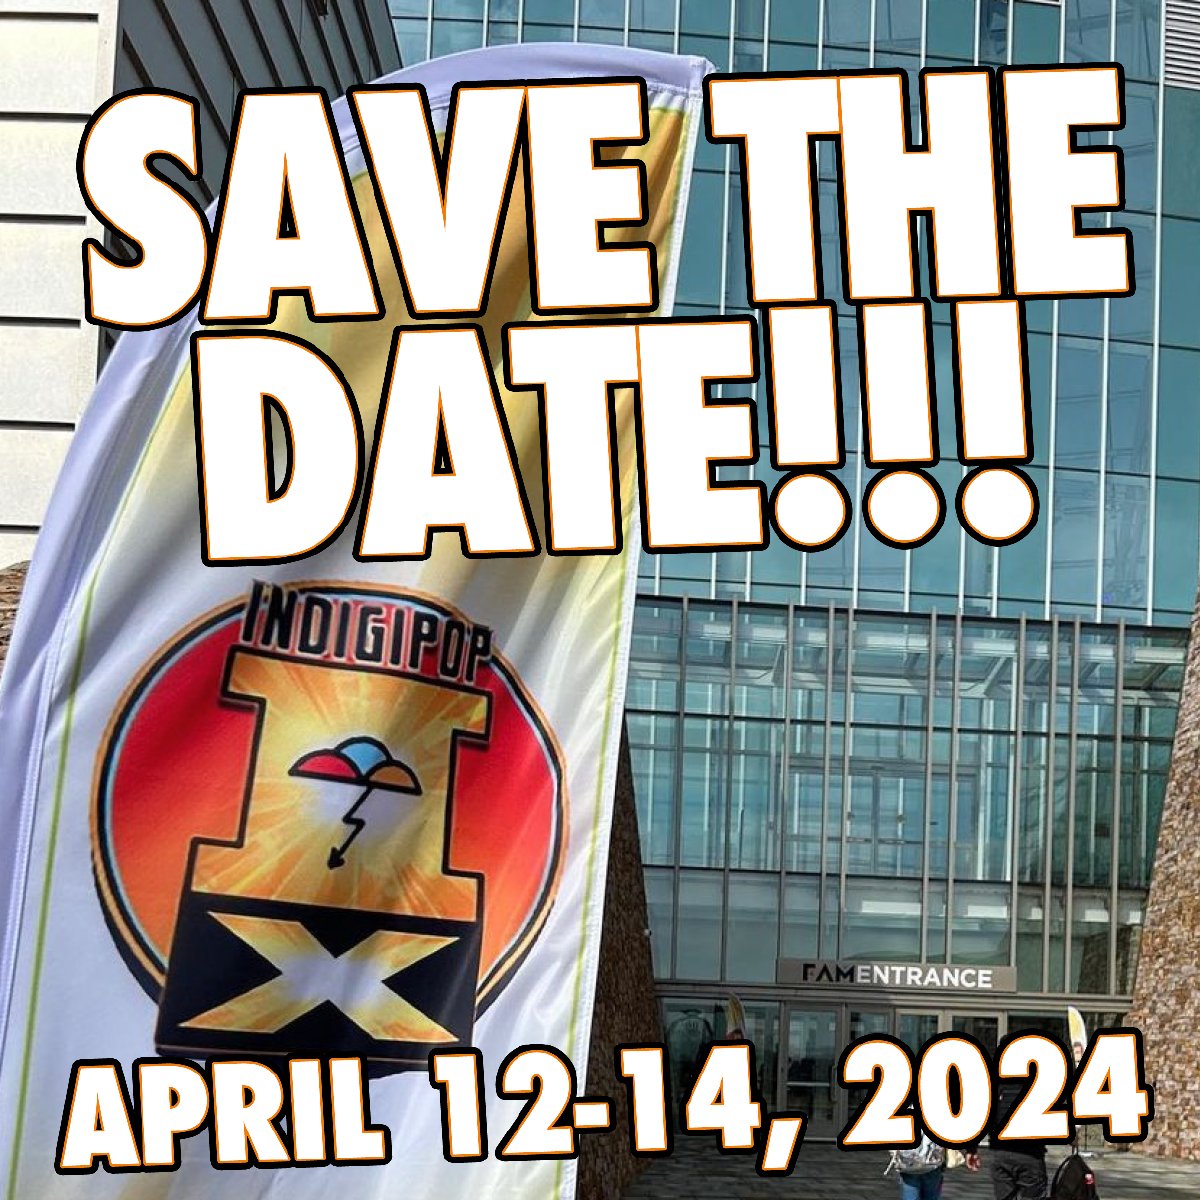 IT'S OFFICIAL! #INDIGIPOPX returns to the @FAMokMuseum in Oklahoma City in 2024! Mark your calendars! Friday-Sunday, APRIL 12-13-14! 

See you all then!

#IPXatFAM #IndiginerdsAssemble #NativeCreatives #IndigiPop2024 #FirstAmericanMuseum #IPXinOKC #FAMStore #NativeRealities #ATCG